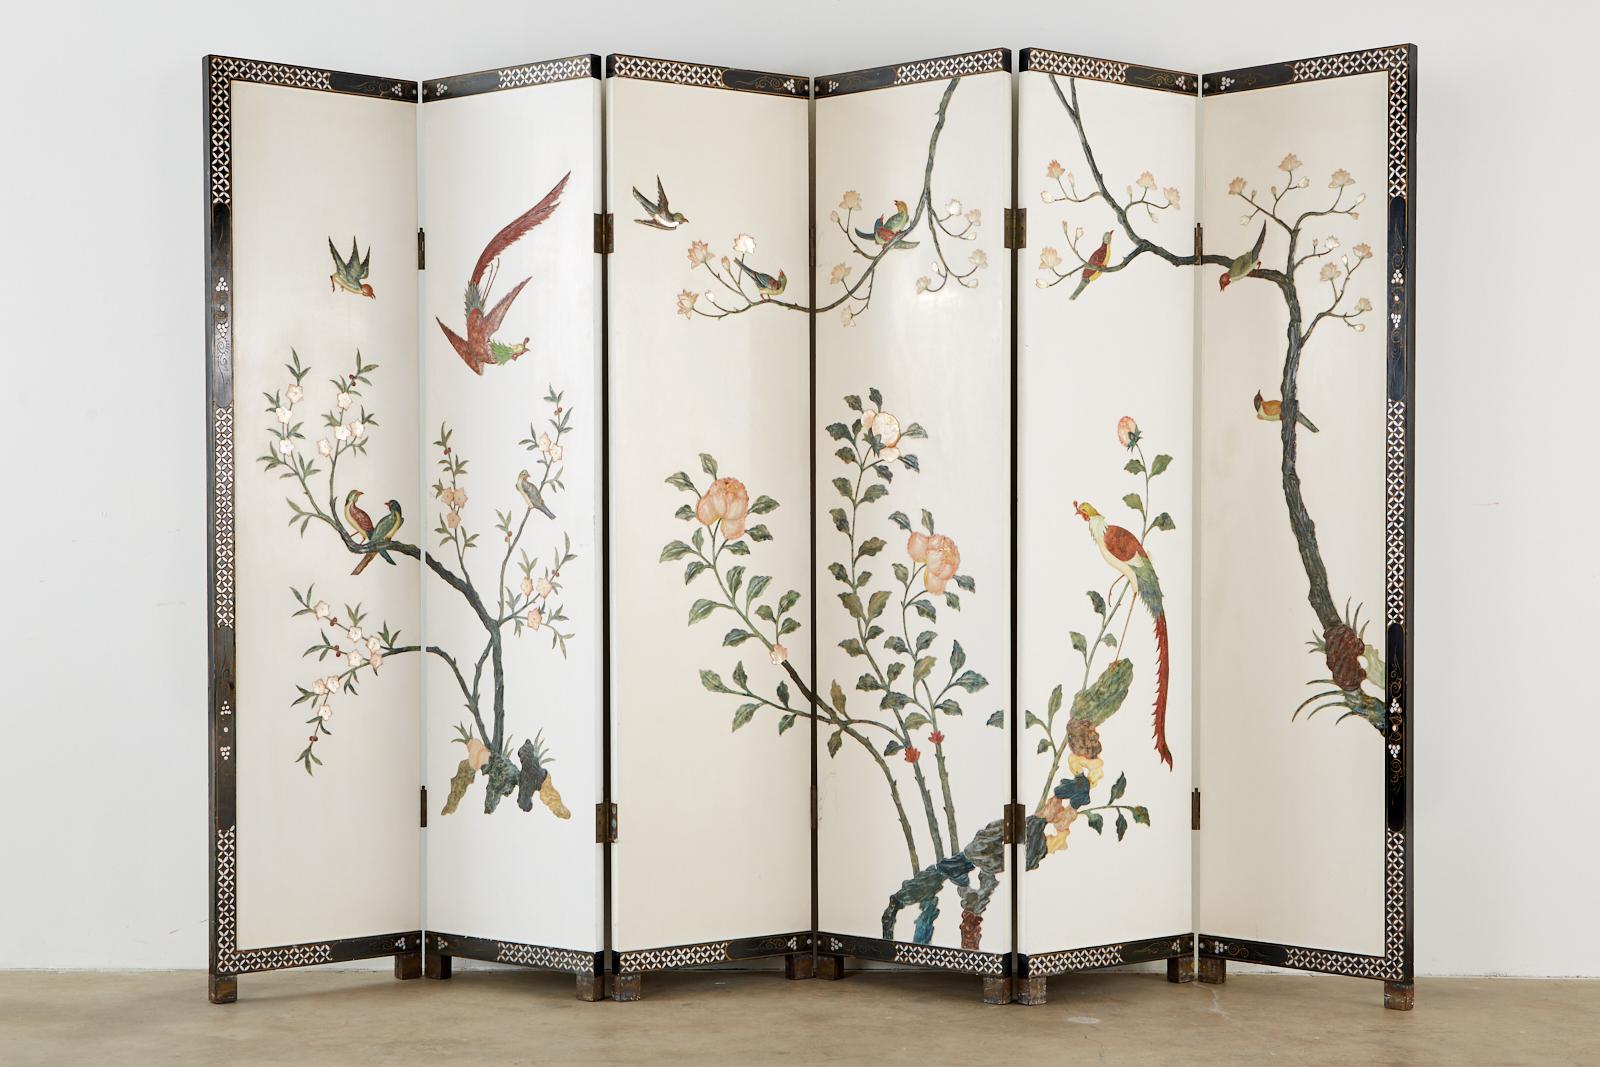 Captivating Chinese export coromandel style six panel screen featuring carved soapstone and hard stone. Exotic birds and flora over a dramatic white lacquered field. The intricately carved stones stand out boldly with precious gemstone shades over